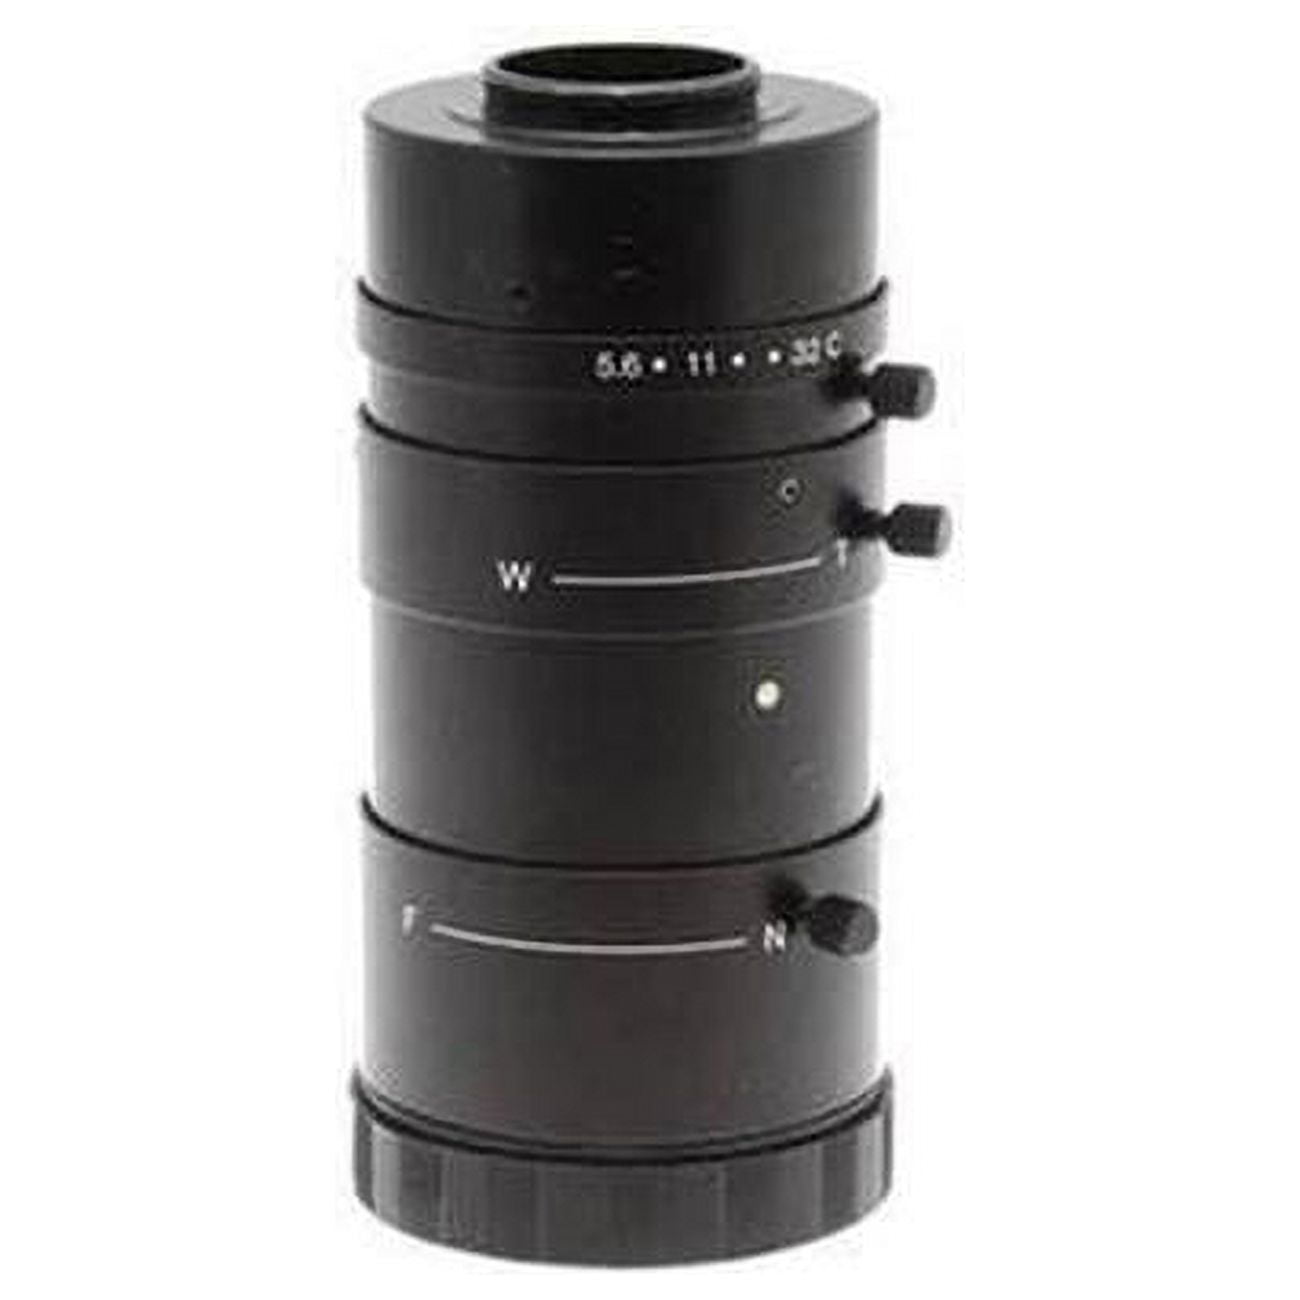 Picture of Aven 26700-181 Computar MLH Lens